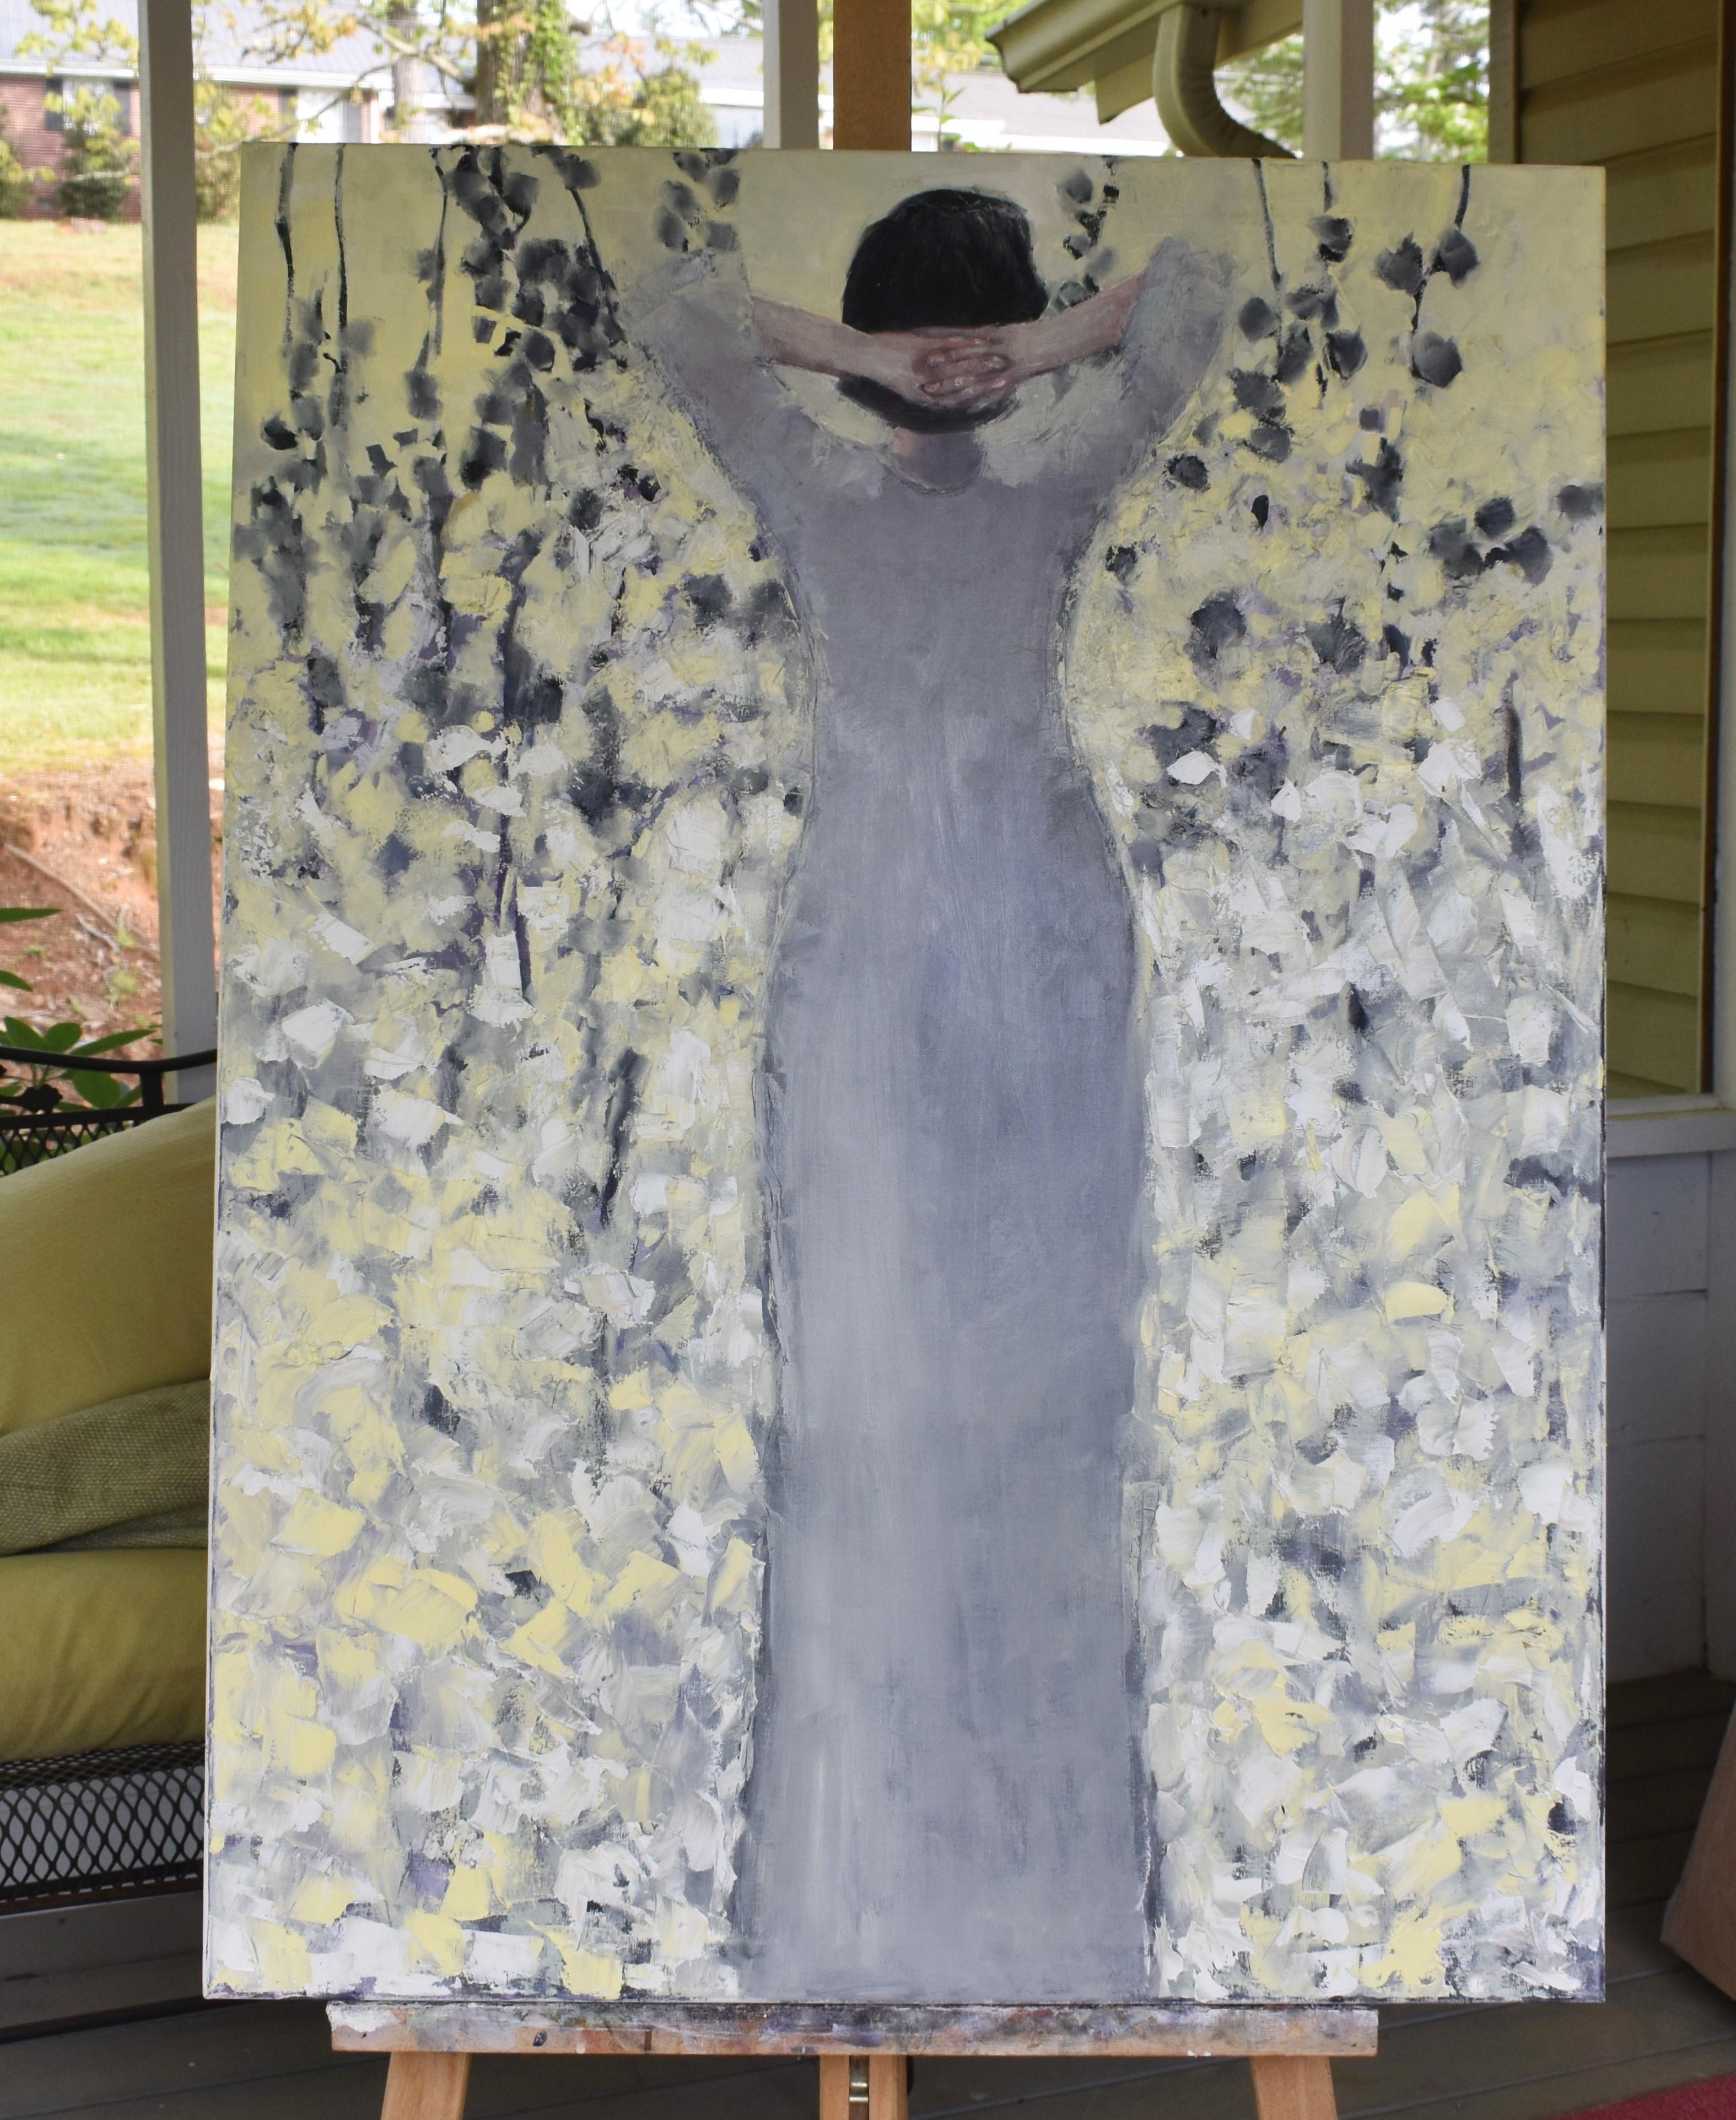 <p>Artist Comments<br />Part of artist Mary Pratt's ongoing Back series. In this figurative piece, Mary surrounds her subject in a primarily soft yellow background, applying texture and movement through the white and gray abstract flowers. 